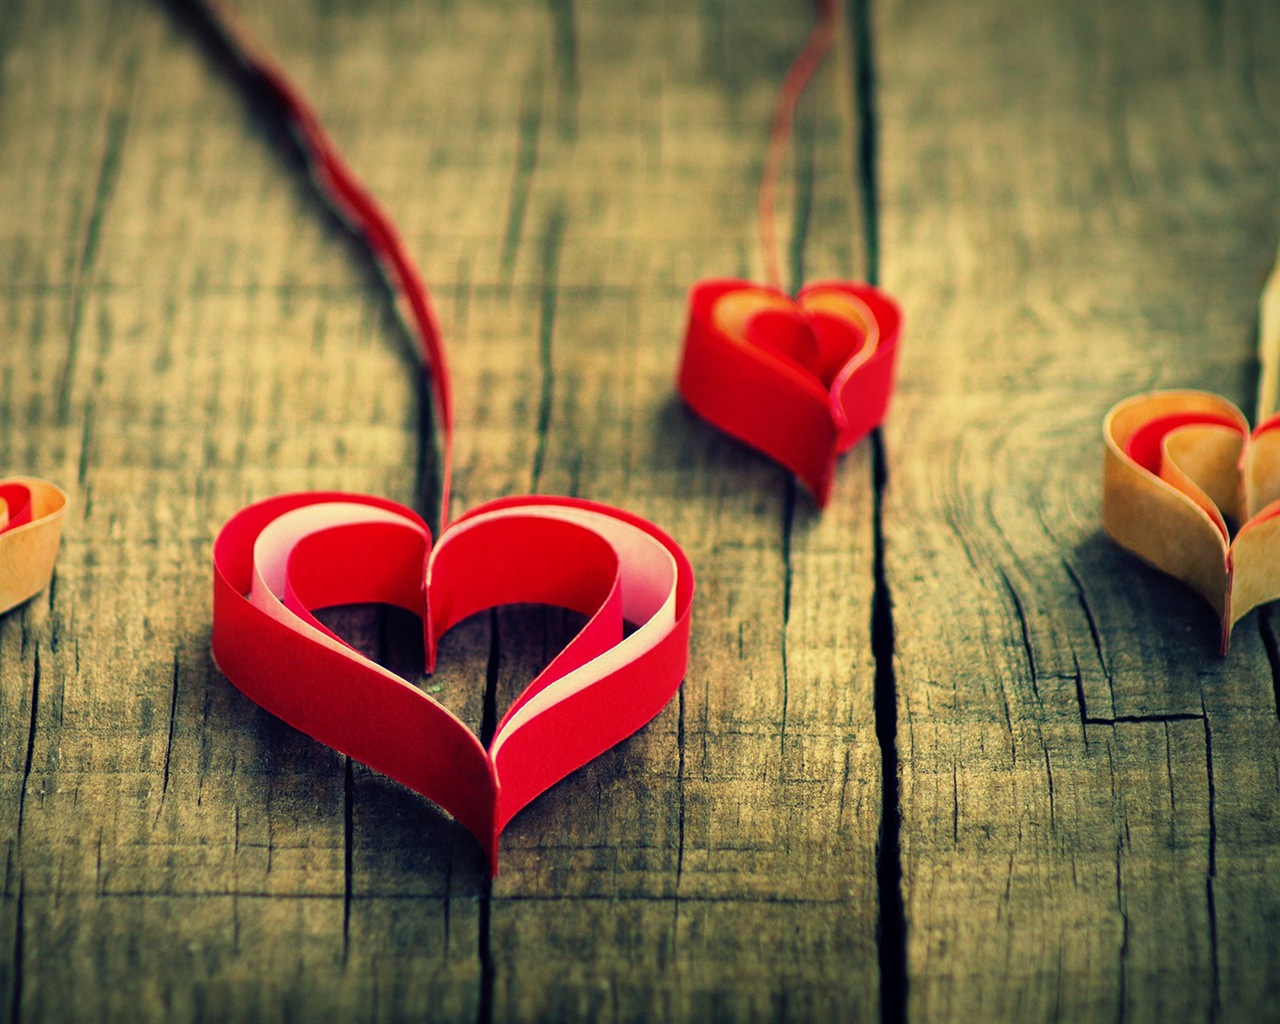 The theme of love, creative heart-shaped HD wallpapers #3 - 1280x1024